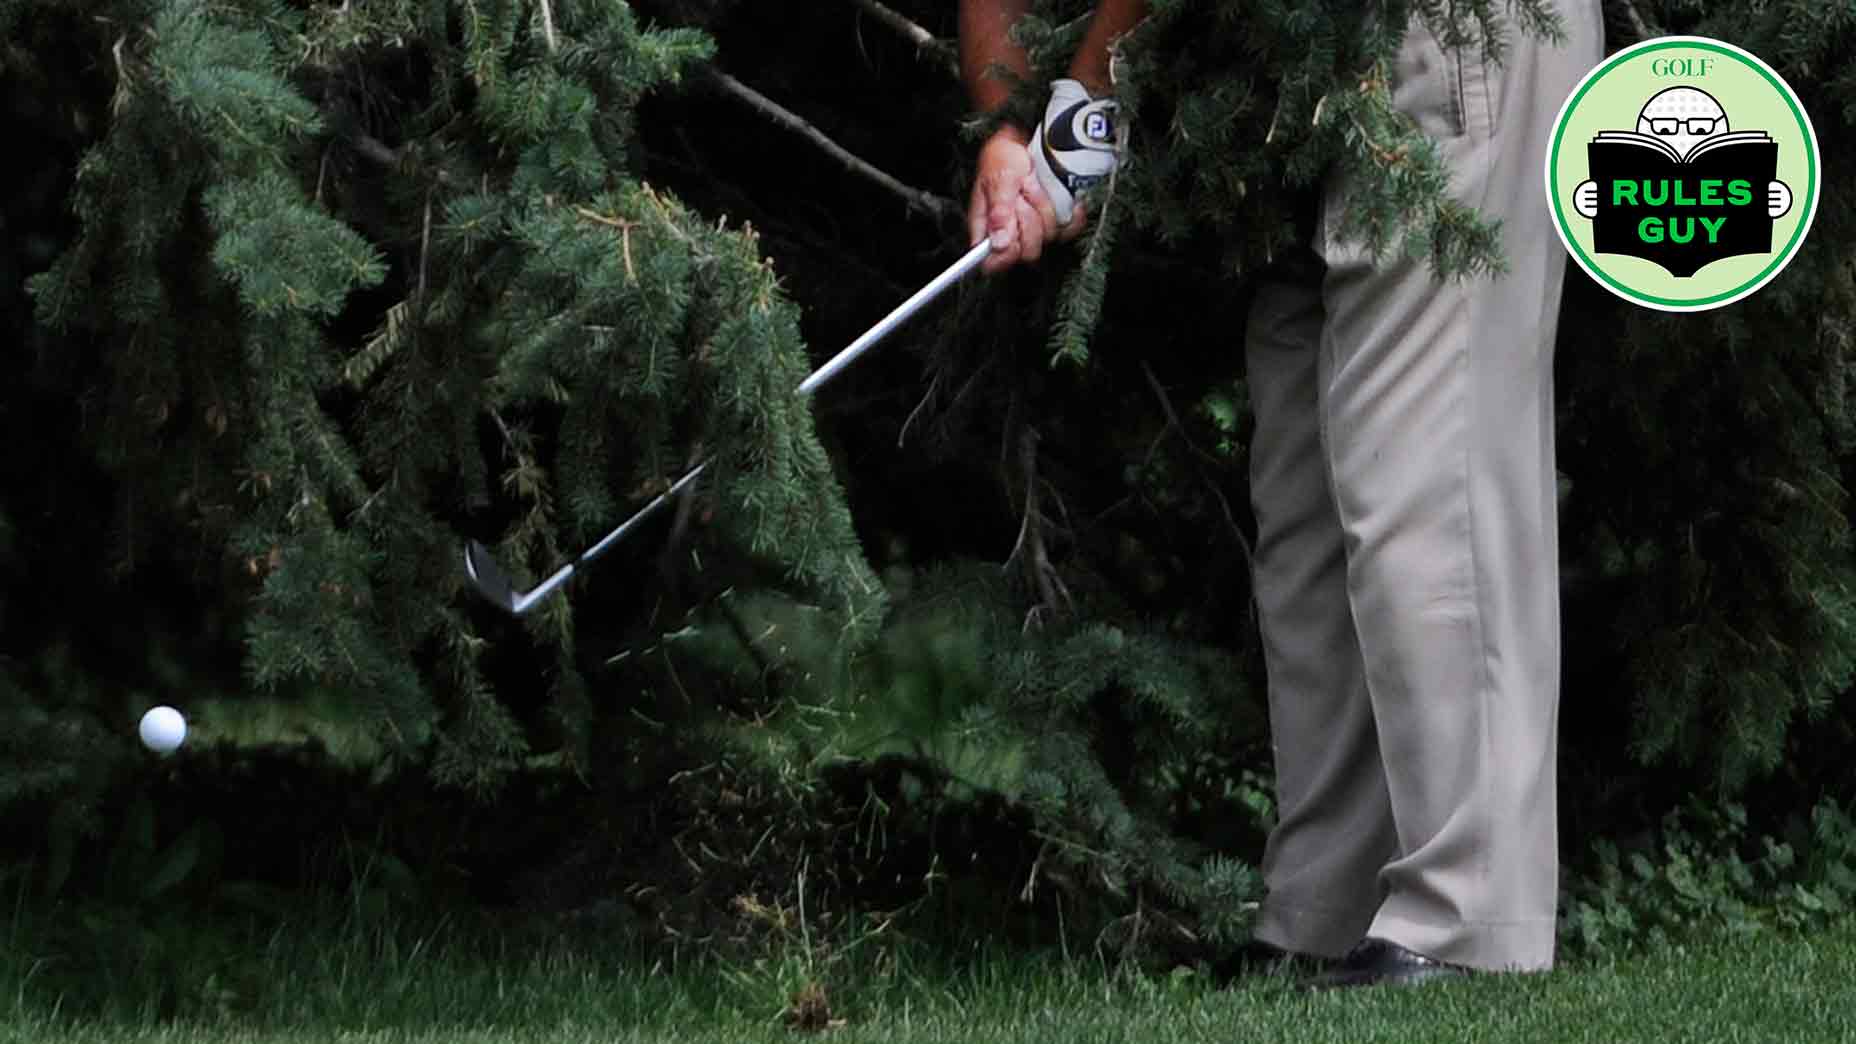 Professional golfer, Doug Perry, Ft. Collins Colorado, chips out from underneath the branches of a very large pine tree on the 9th fairway during the U.S. Senior Open Sectional Qualifying at Rolling Hills Country Club in Golden Thursday morning.